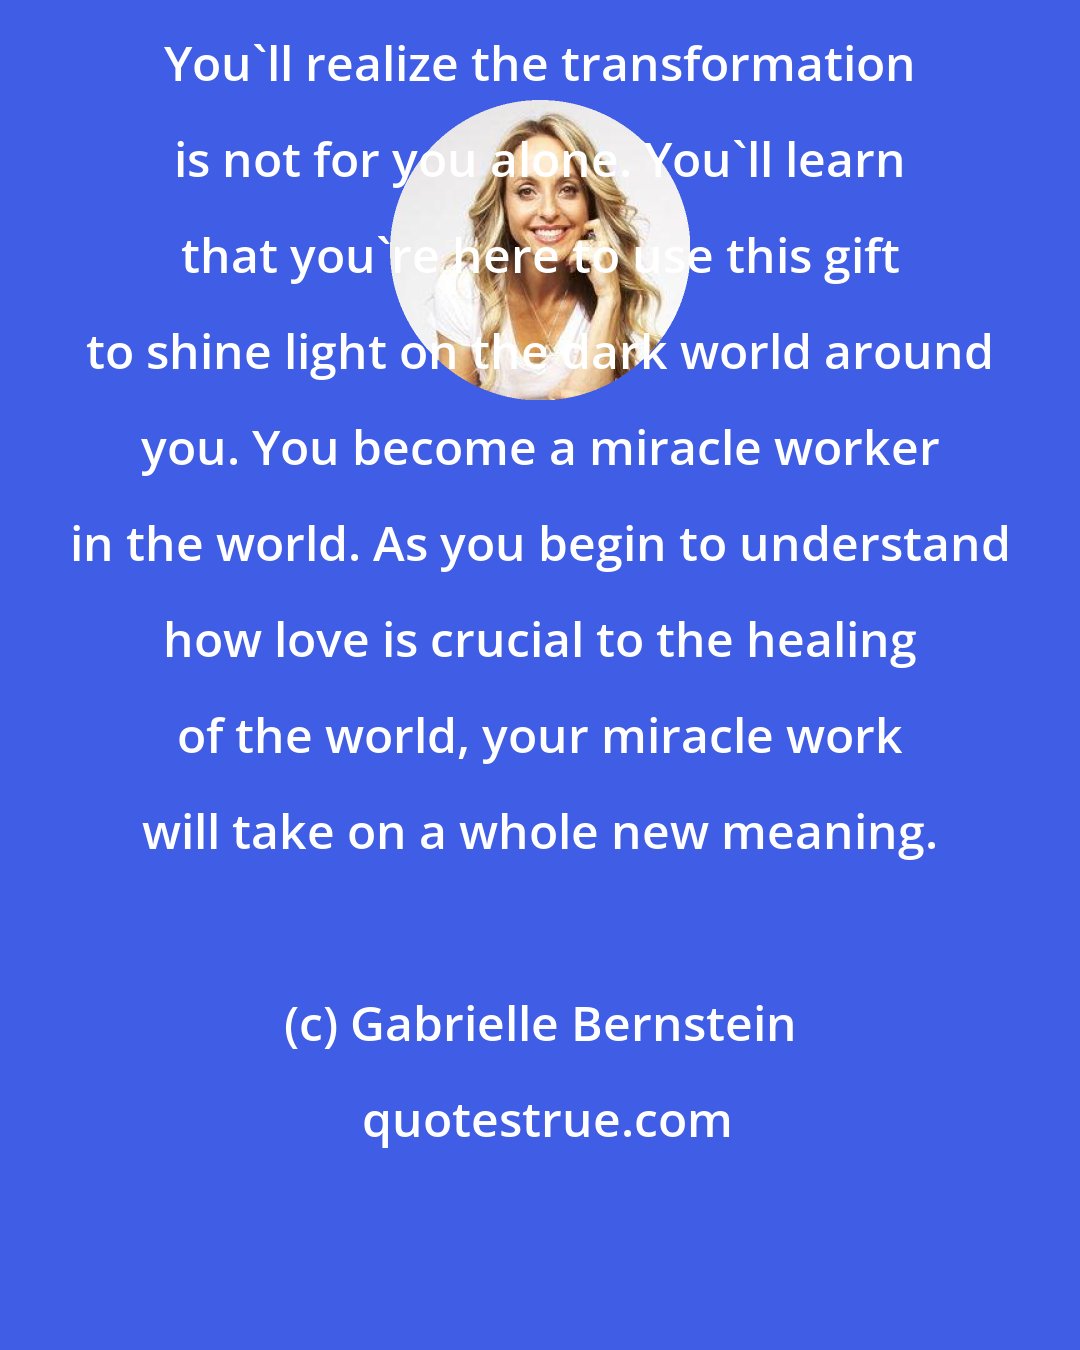 Gabrielle Bernstein: You'll realize the transformation is not for you alone. You'll learn that you're here to use this gift to shine light on the dark world around you. You become a miracle worker in the world. As you begin to understand how love is crucial to the healing of the world, your miracle work will take on a whole new meaning.